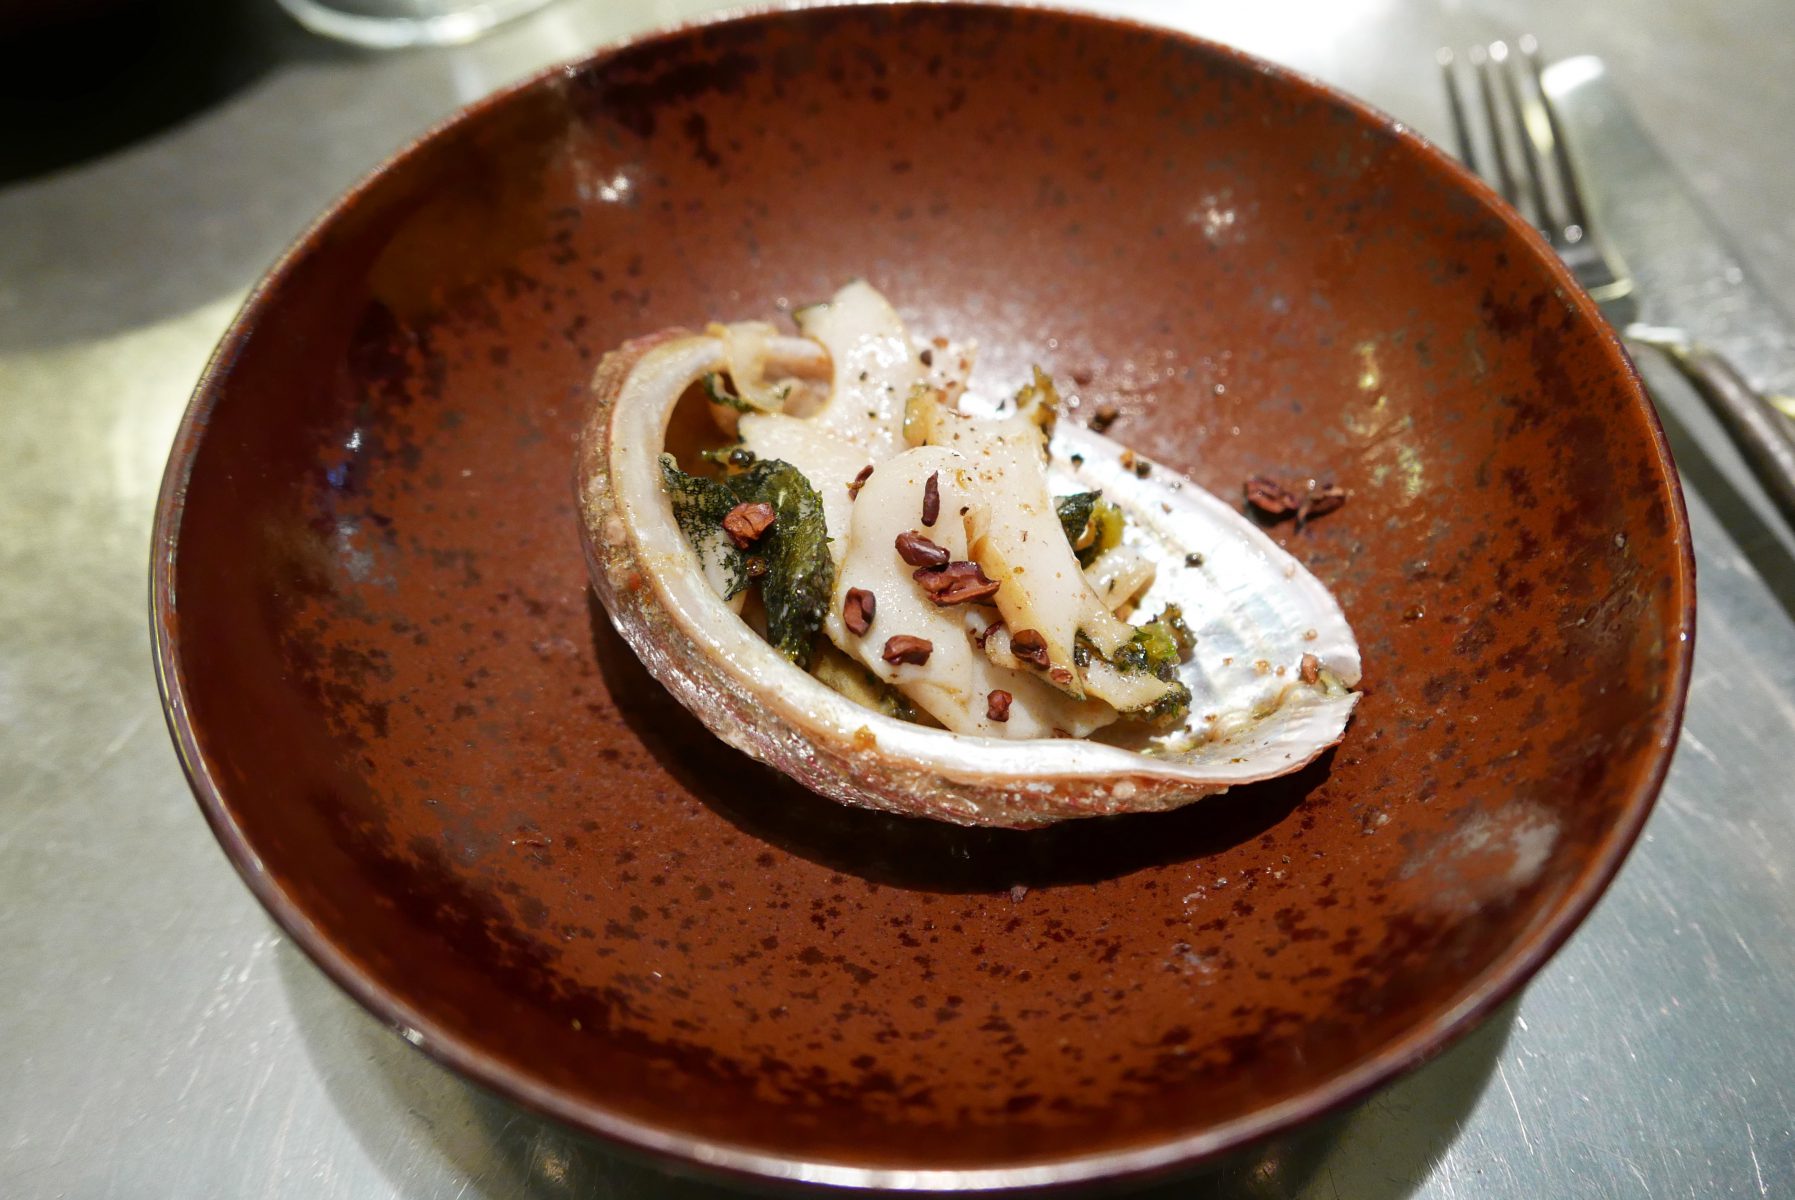 The abalone was "cooked" with brown butter